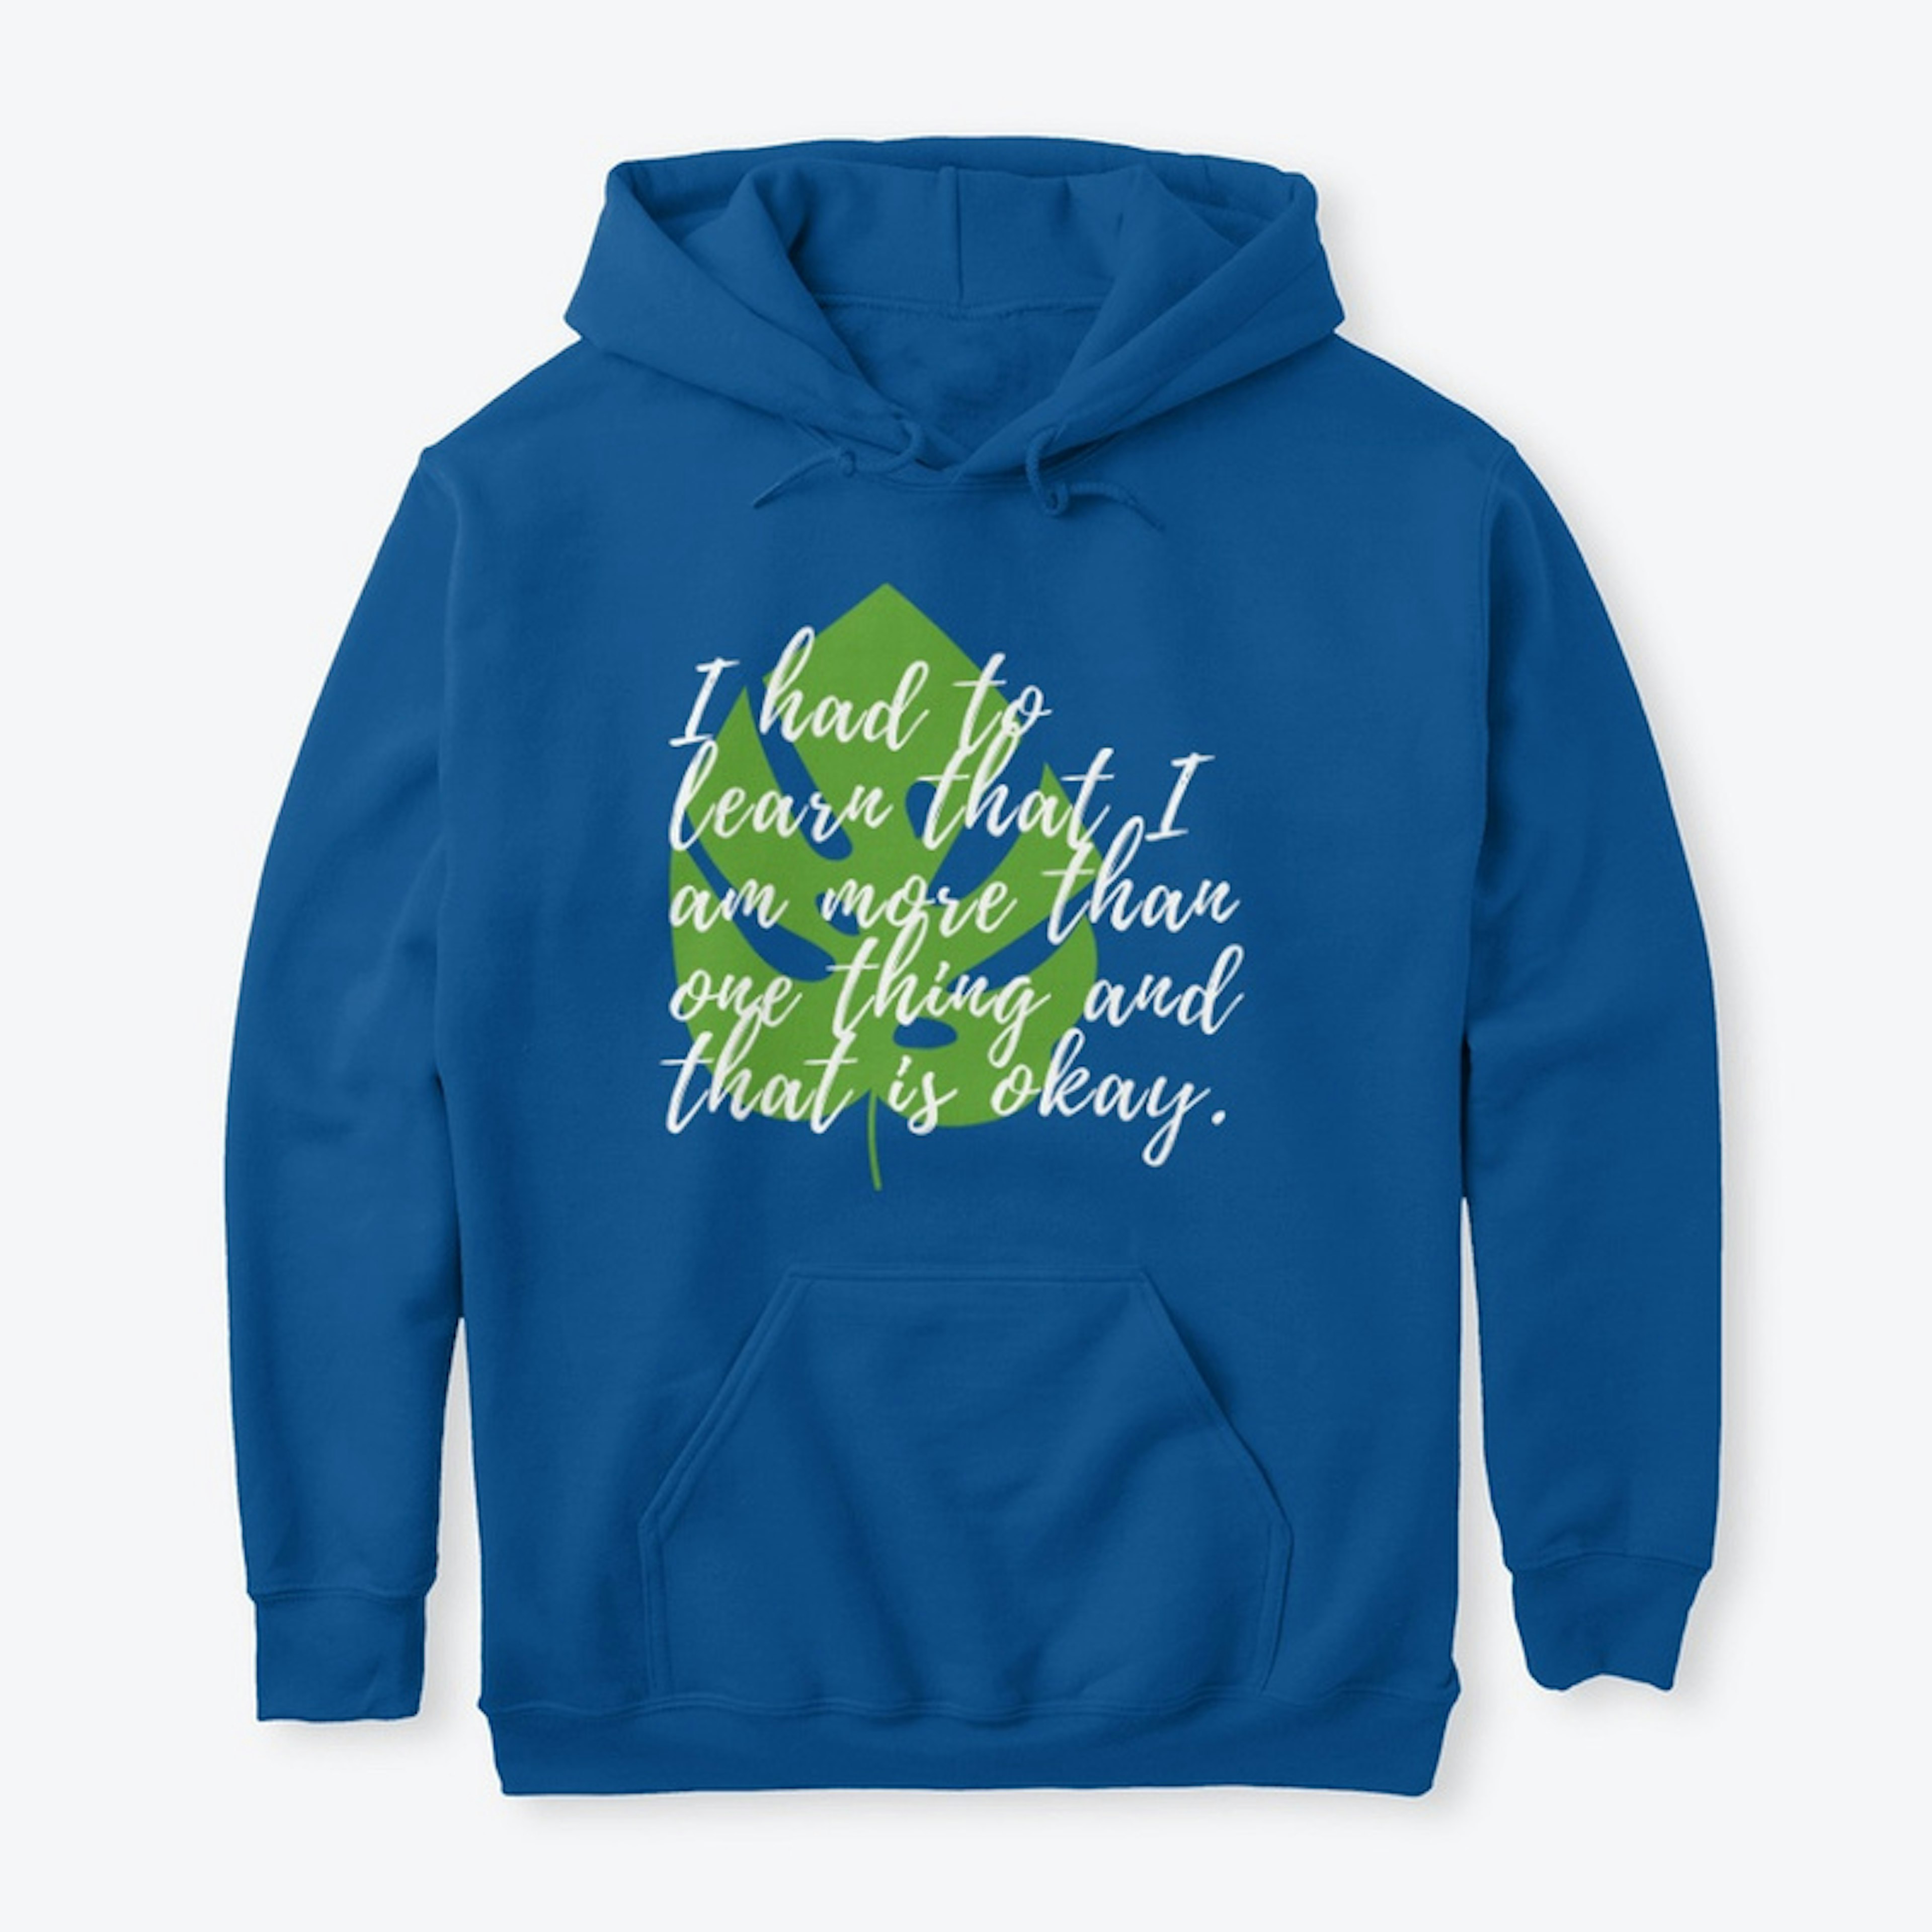 "I am more than one thing" Hoodie